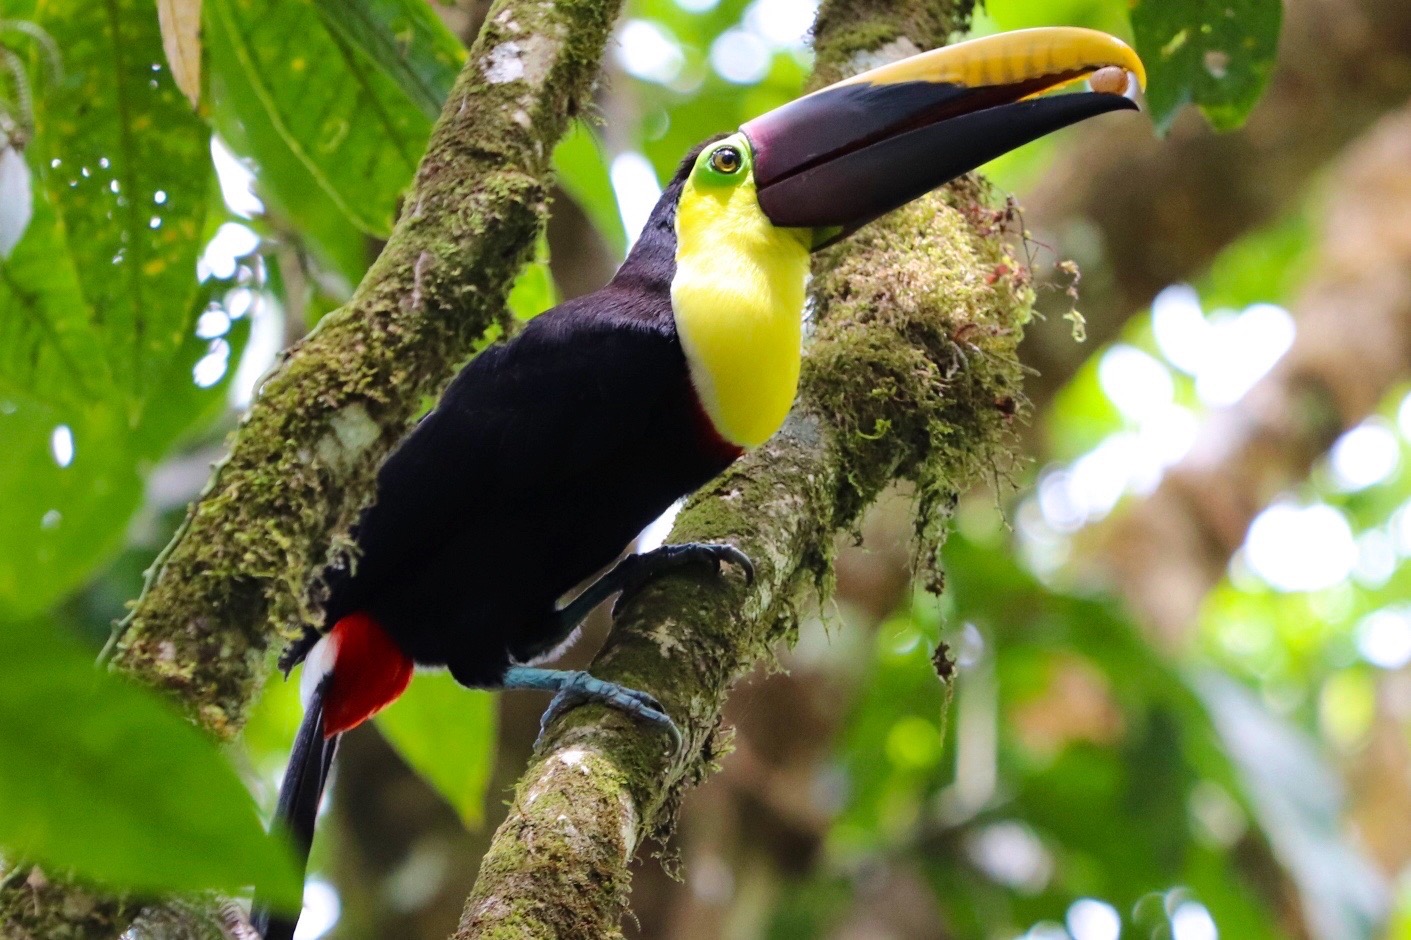 The much wanted encounter with the Toucan!